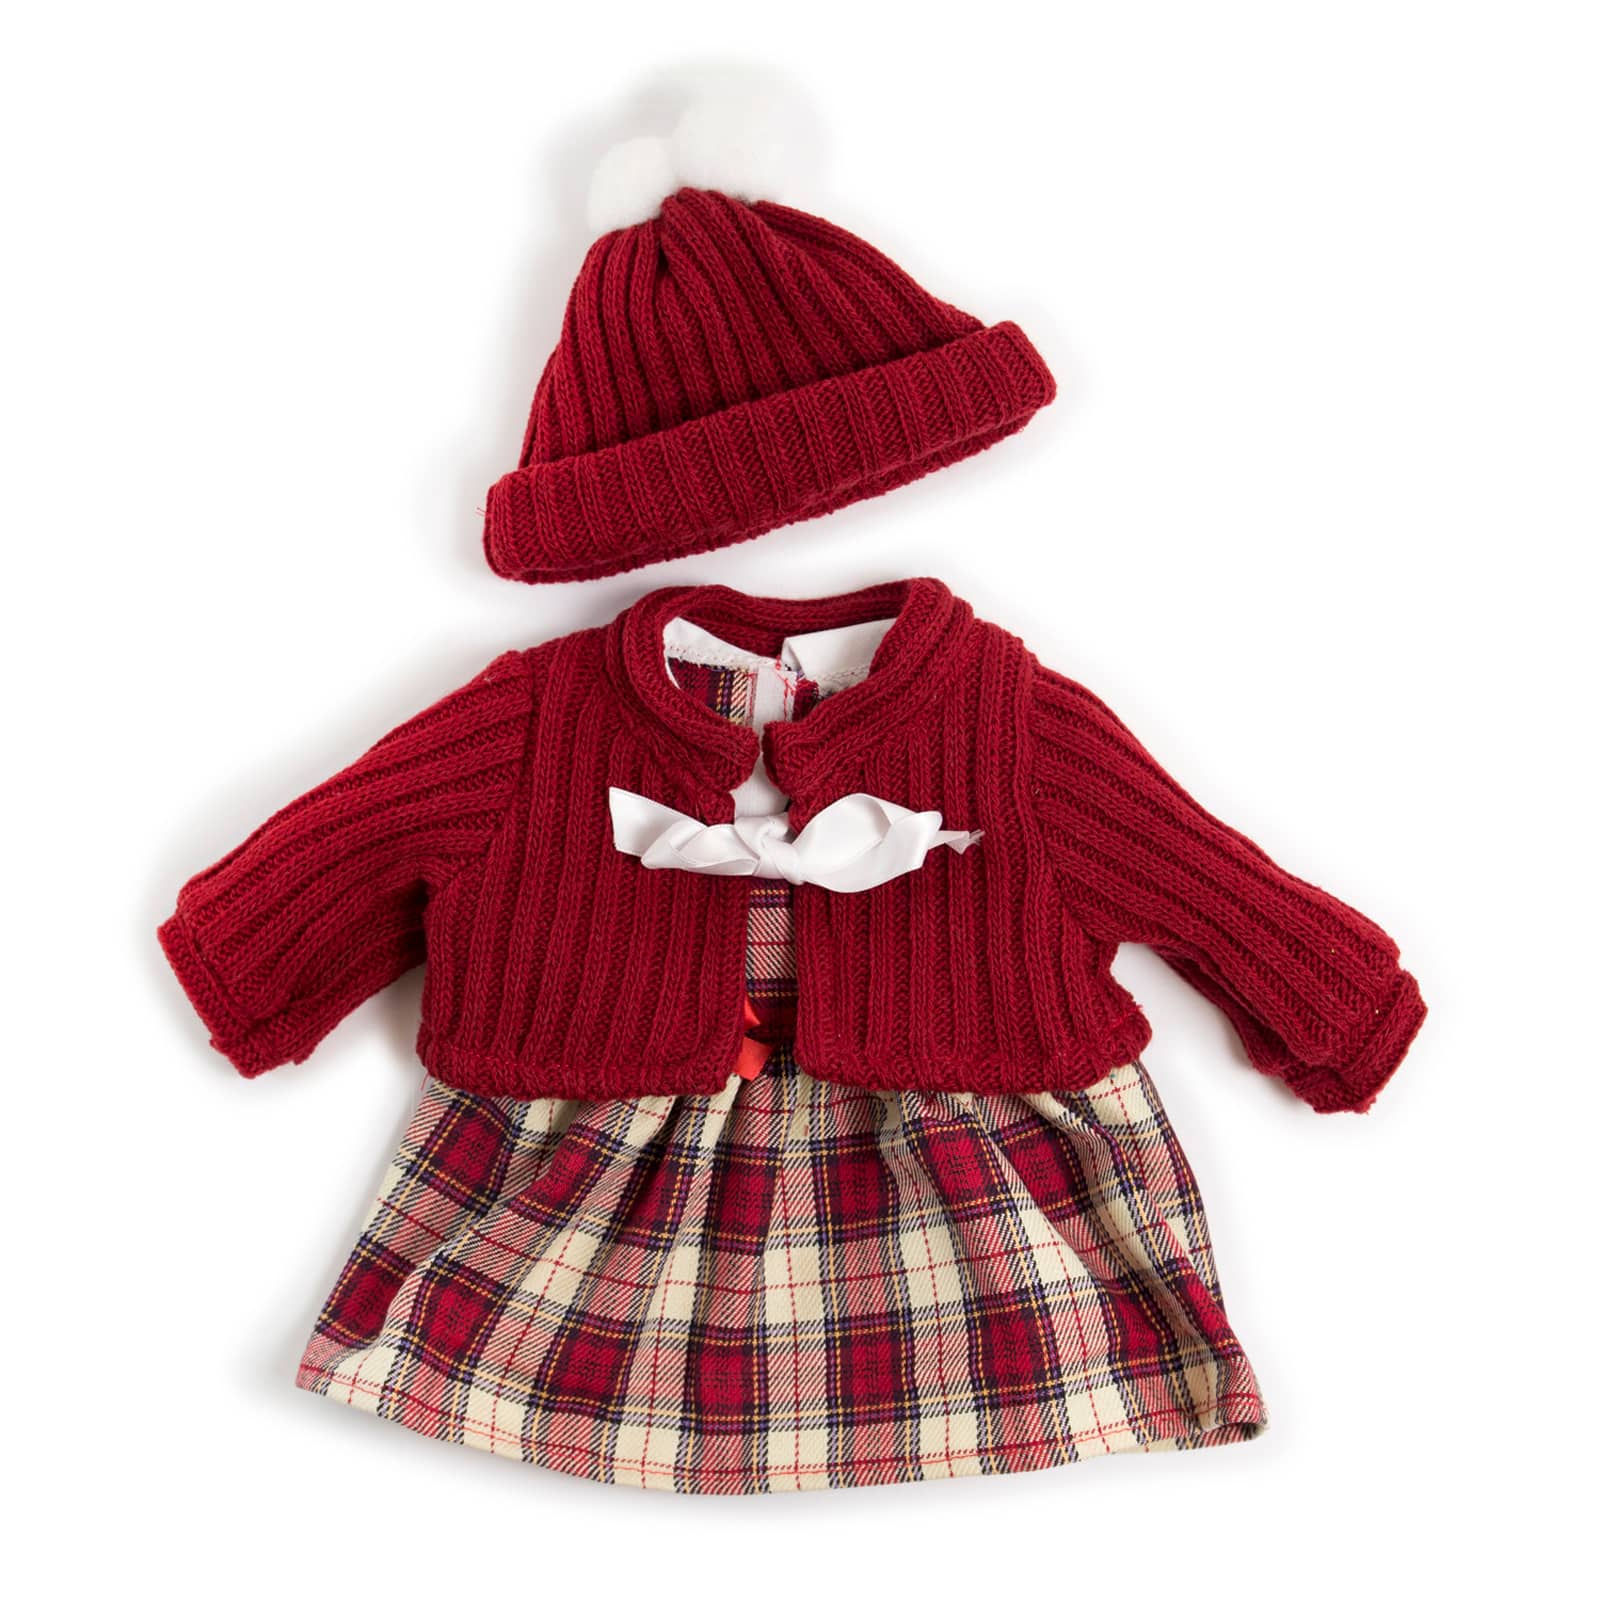 Miniland Educational Cold Weather Dress Doll Clothes Set